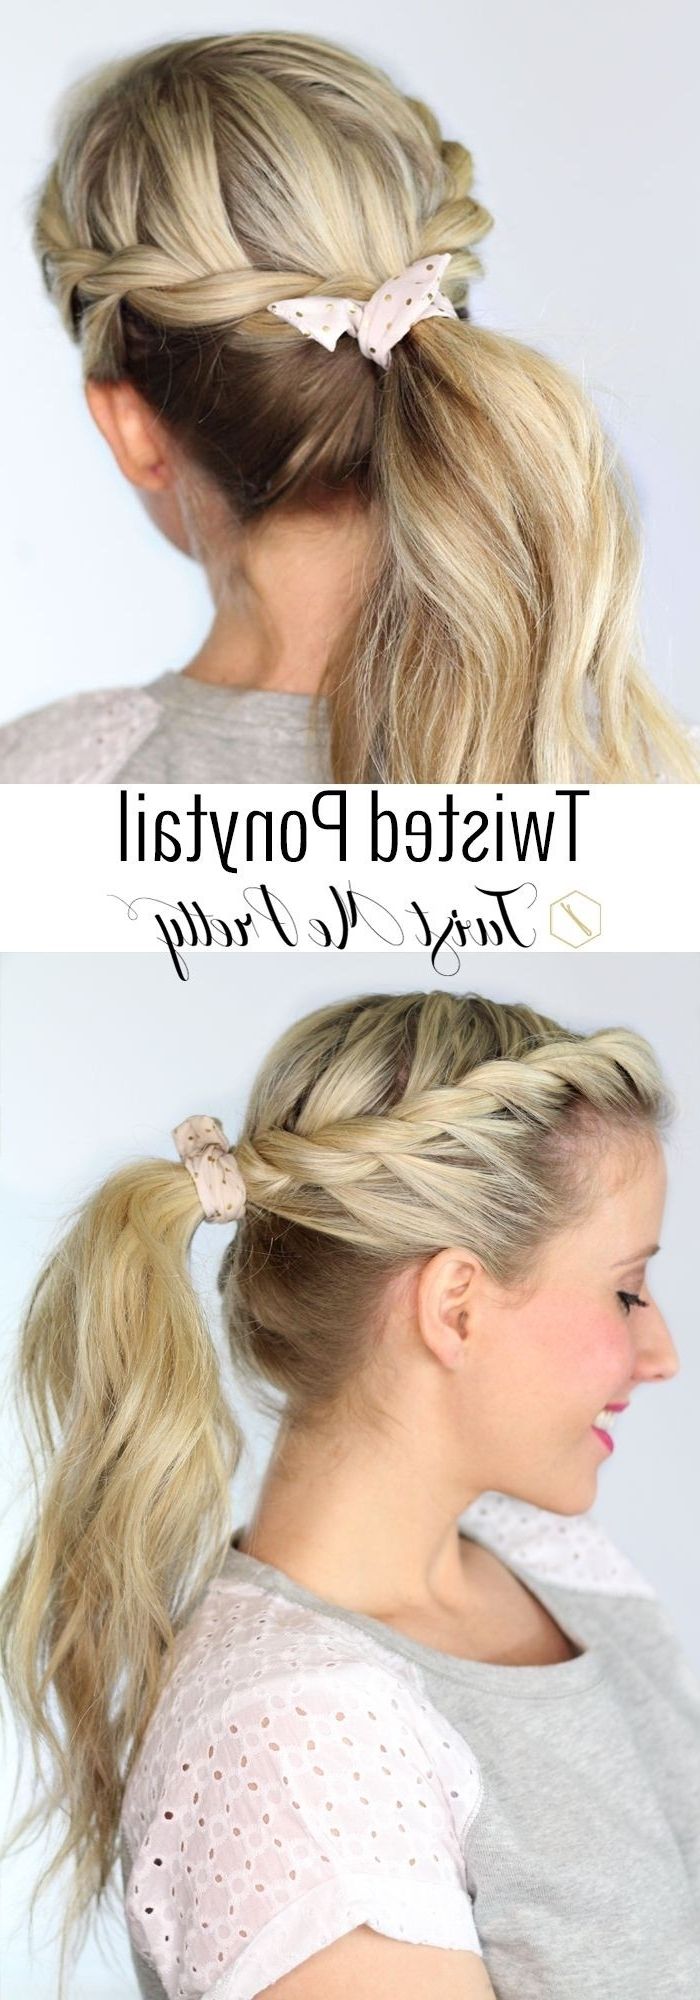 Top 10 Fashionable Ponytail Hairstyles For Summer  (View 19 of 20)